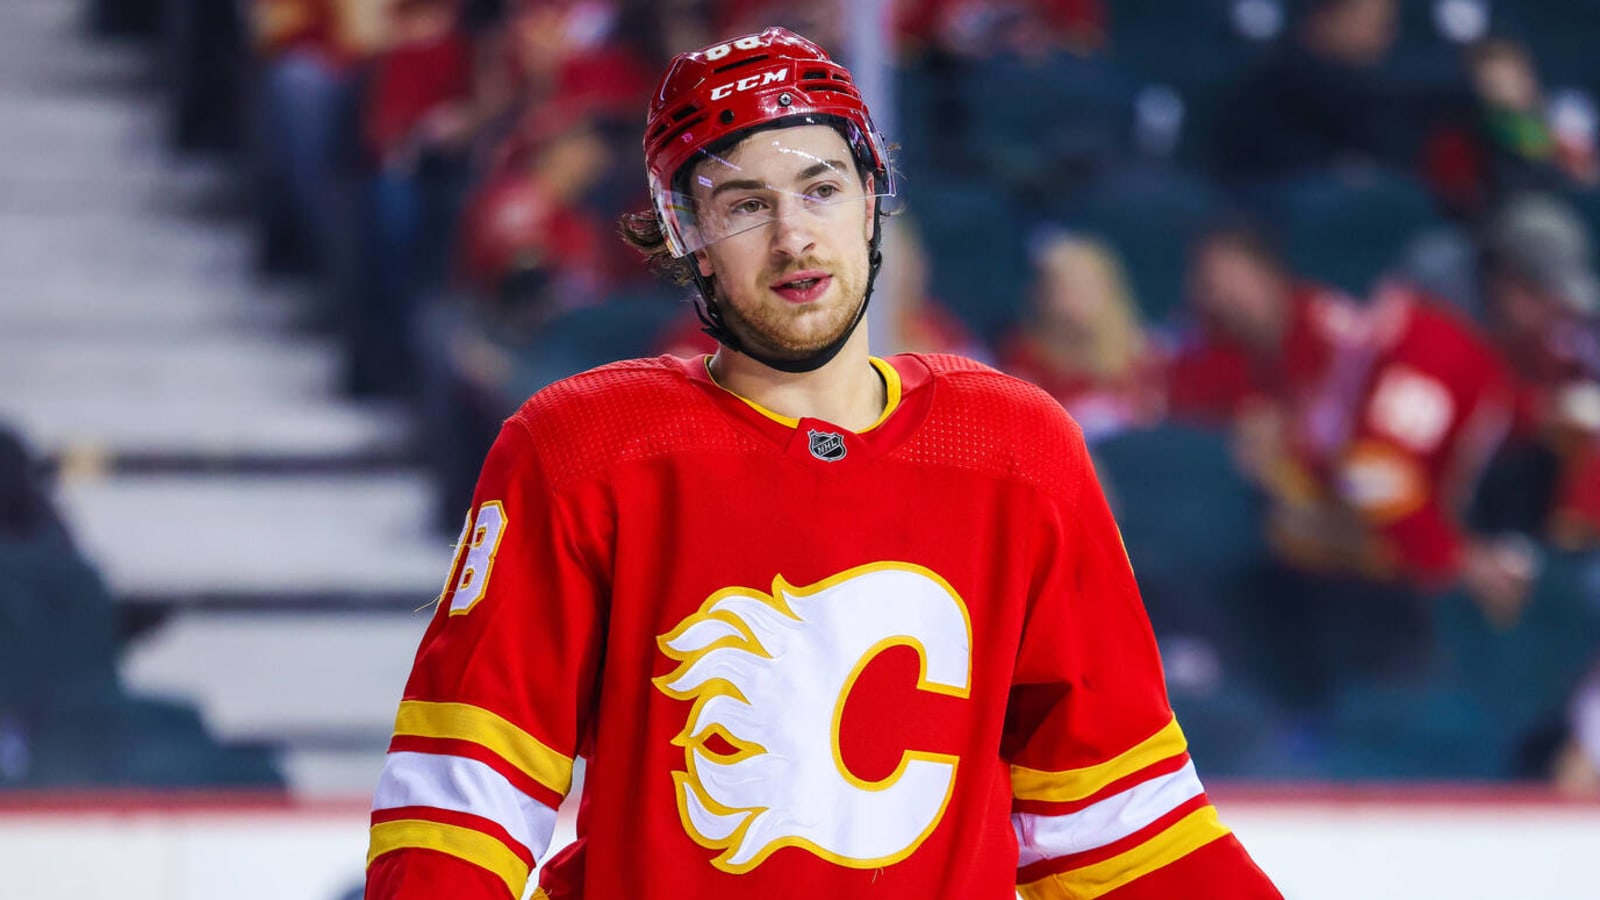 Flames sign Mangiapane to 3-year contract with $5.8M AAV